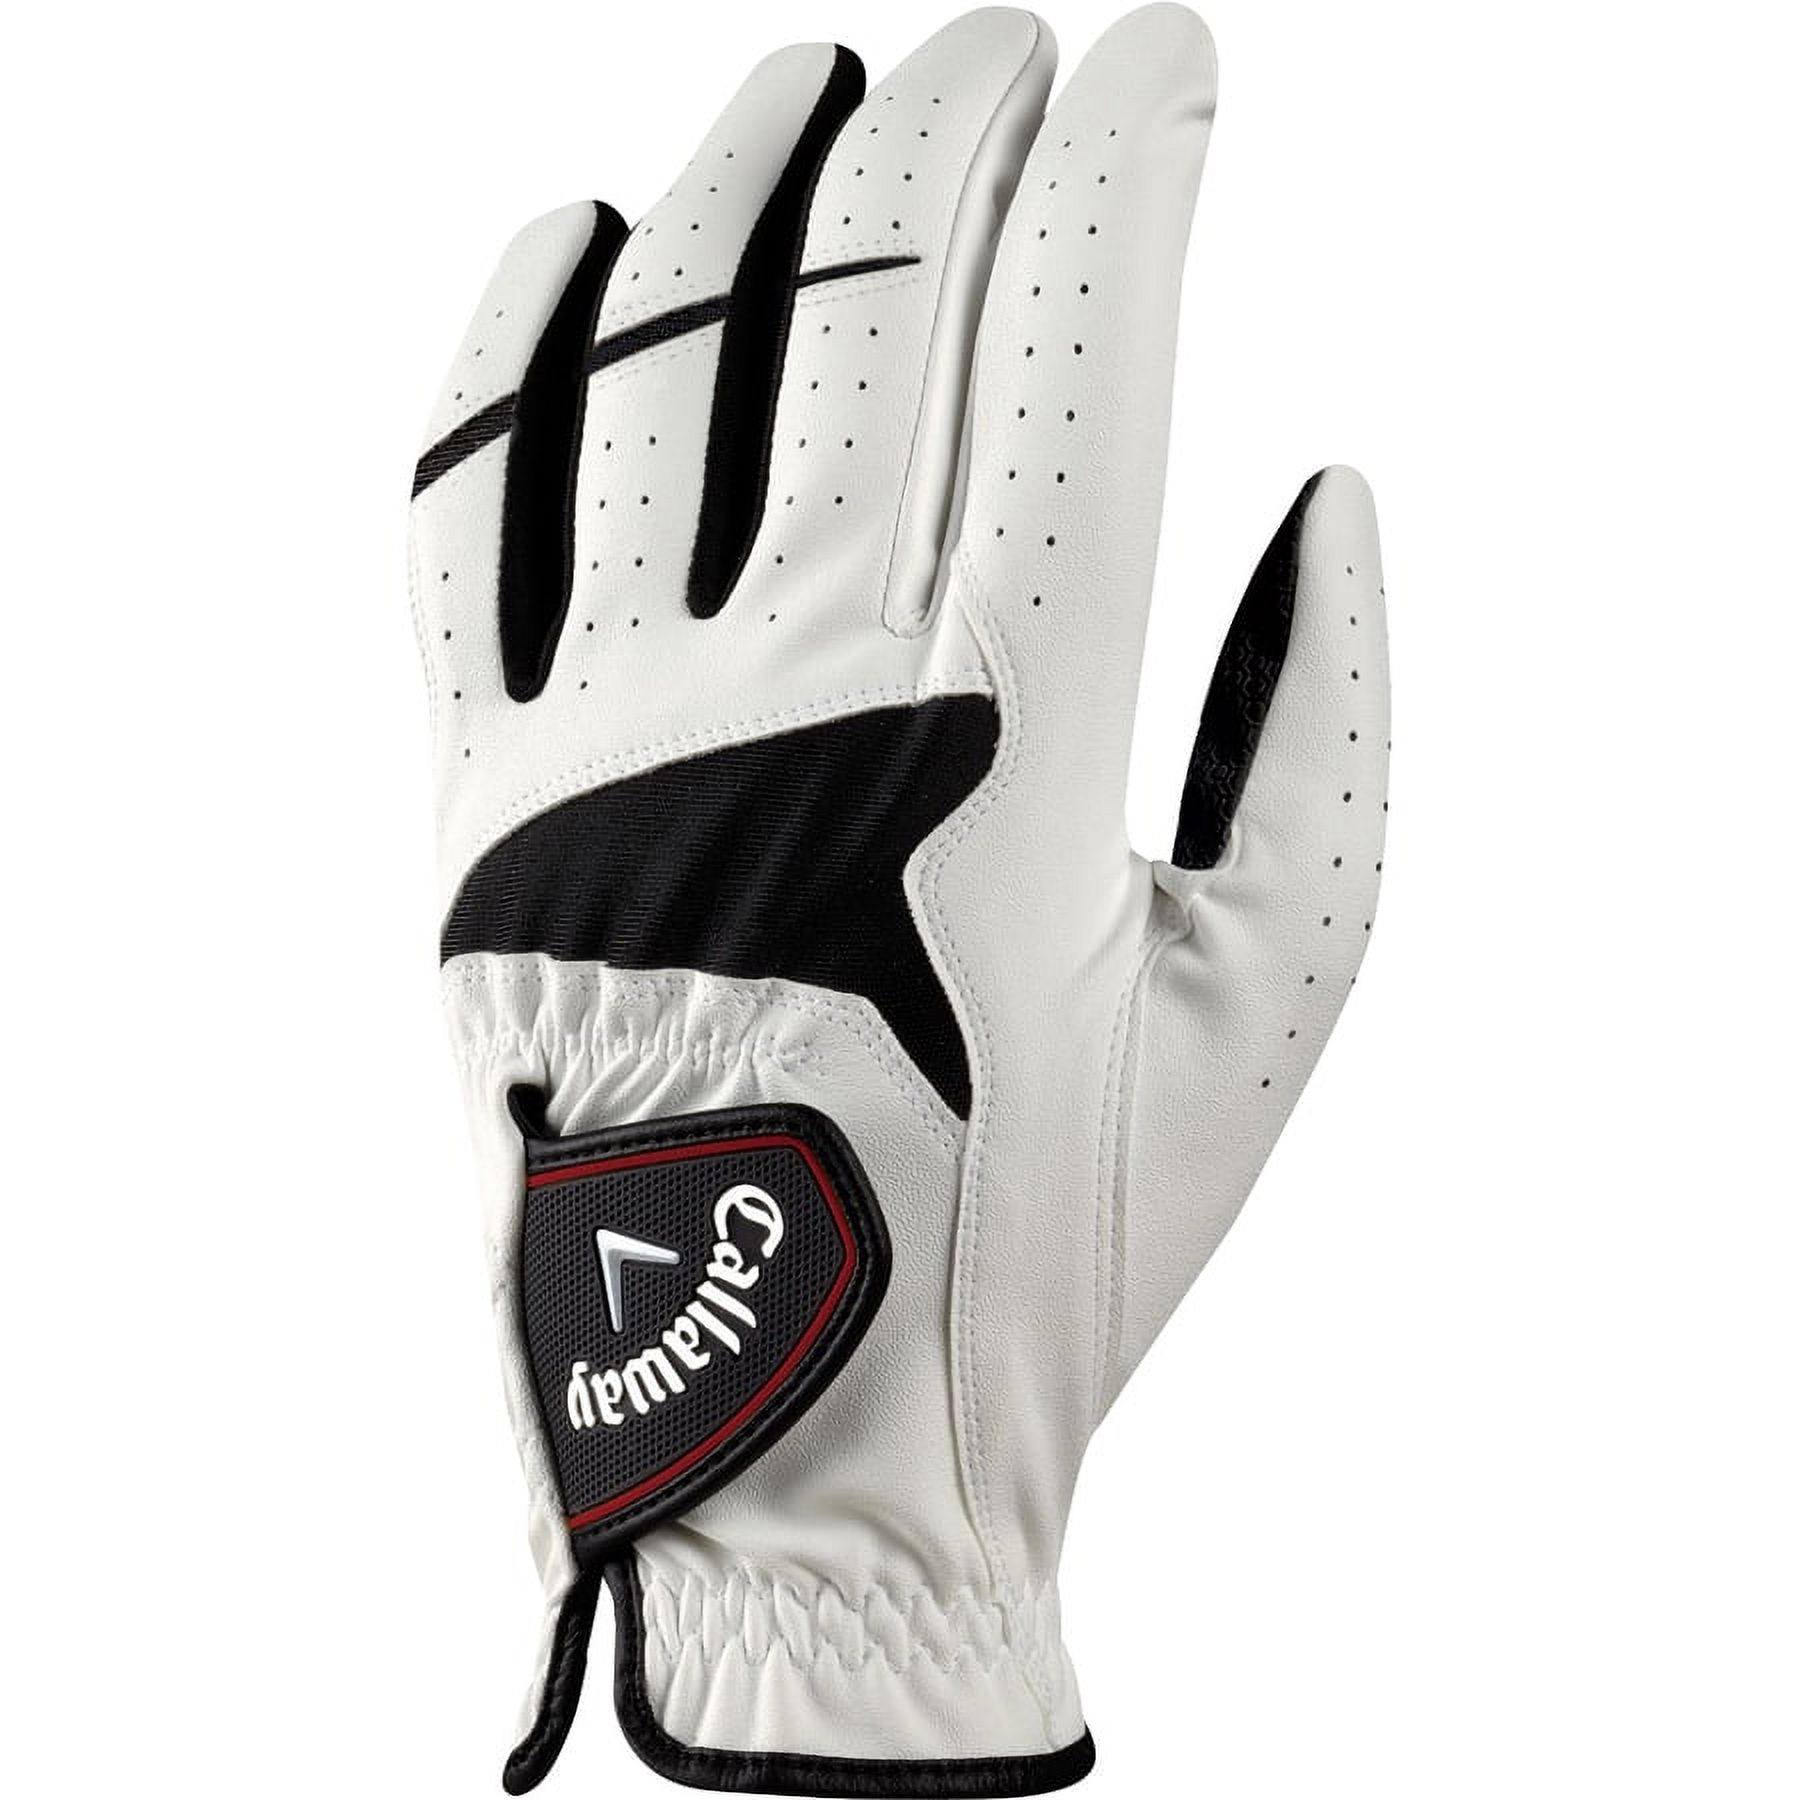 Callaway XXT Xtreme Golf Glove, 2 Pack, White (Worn on Left Hand) - image 2 of 3